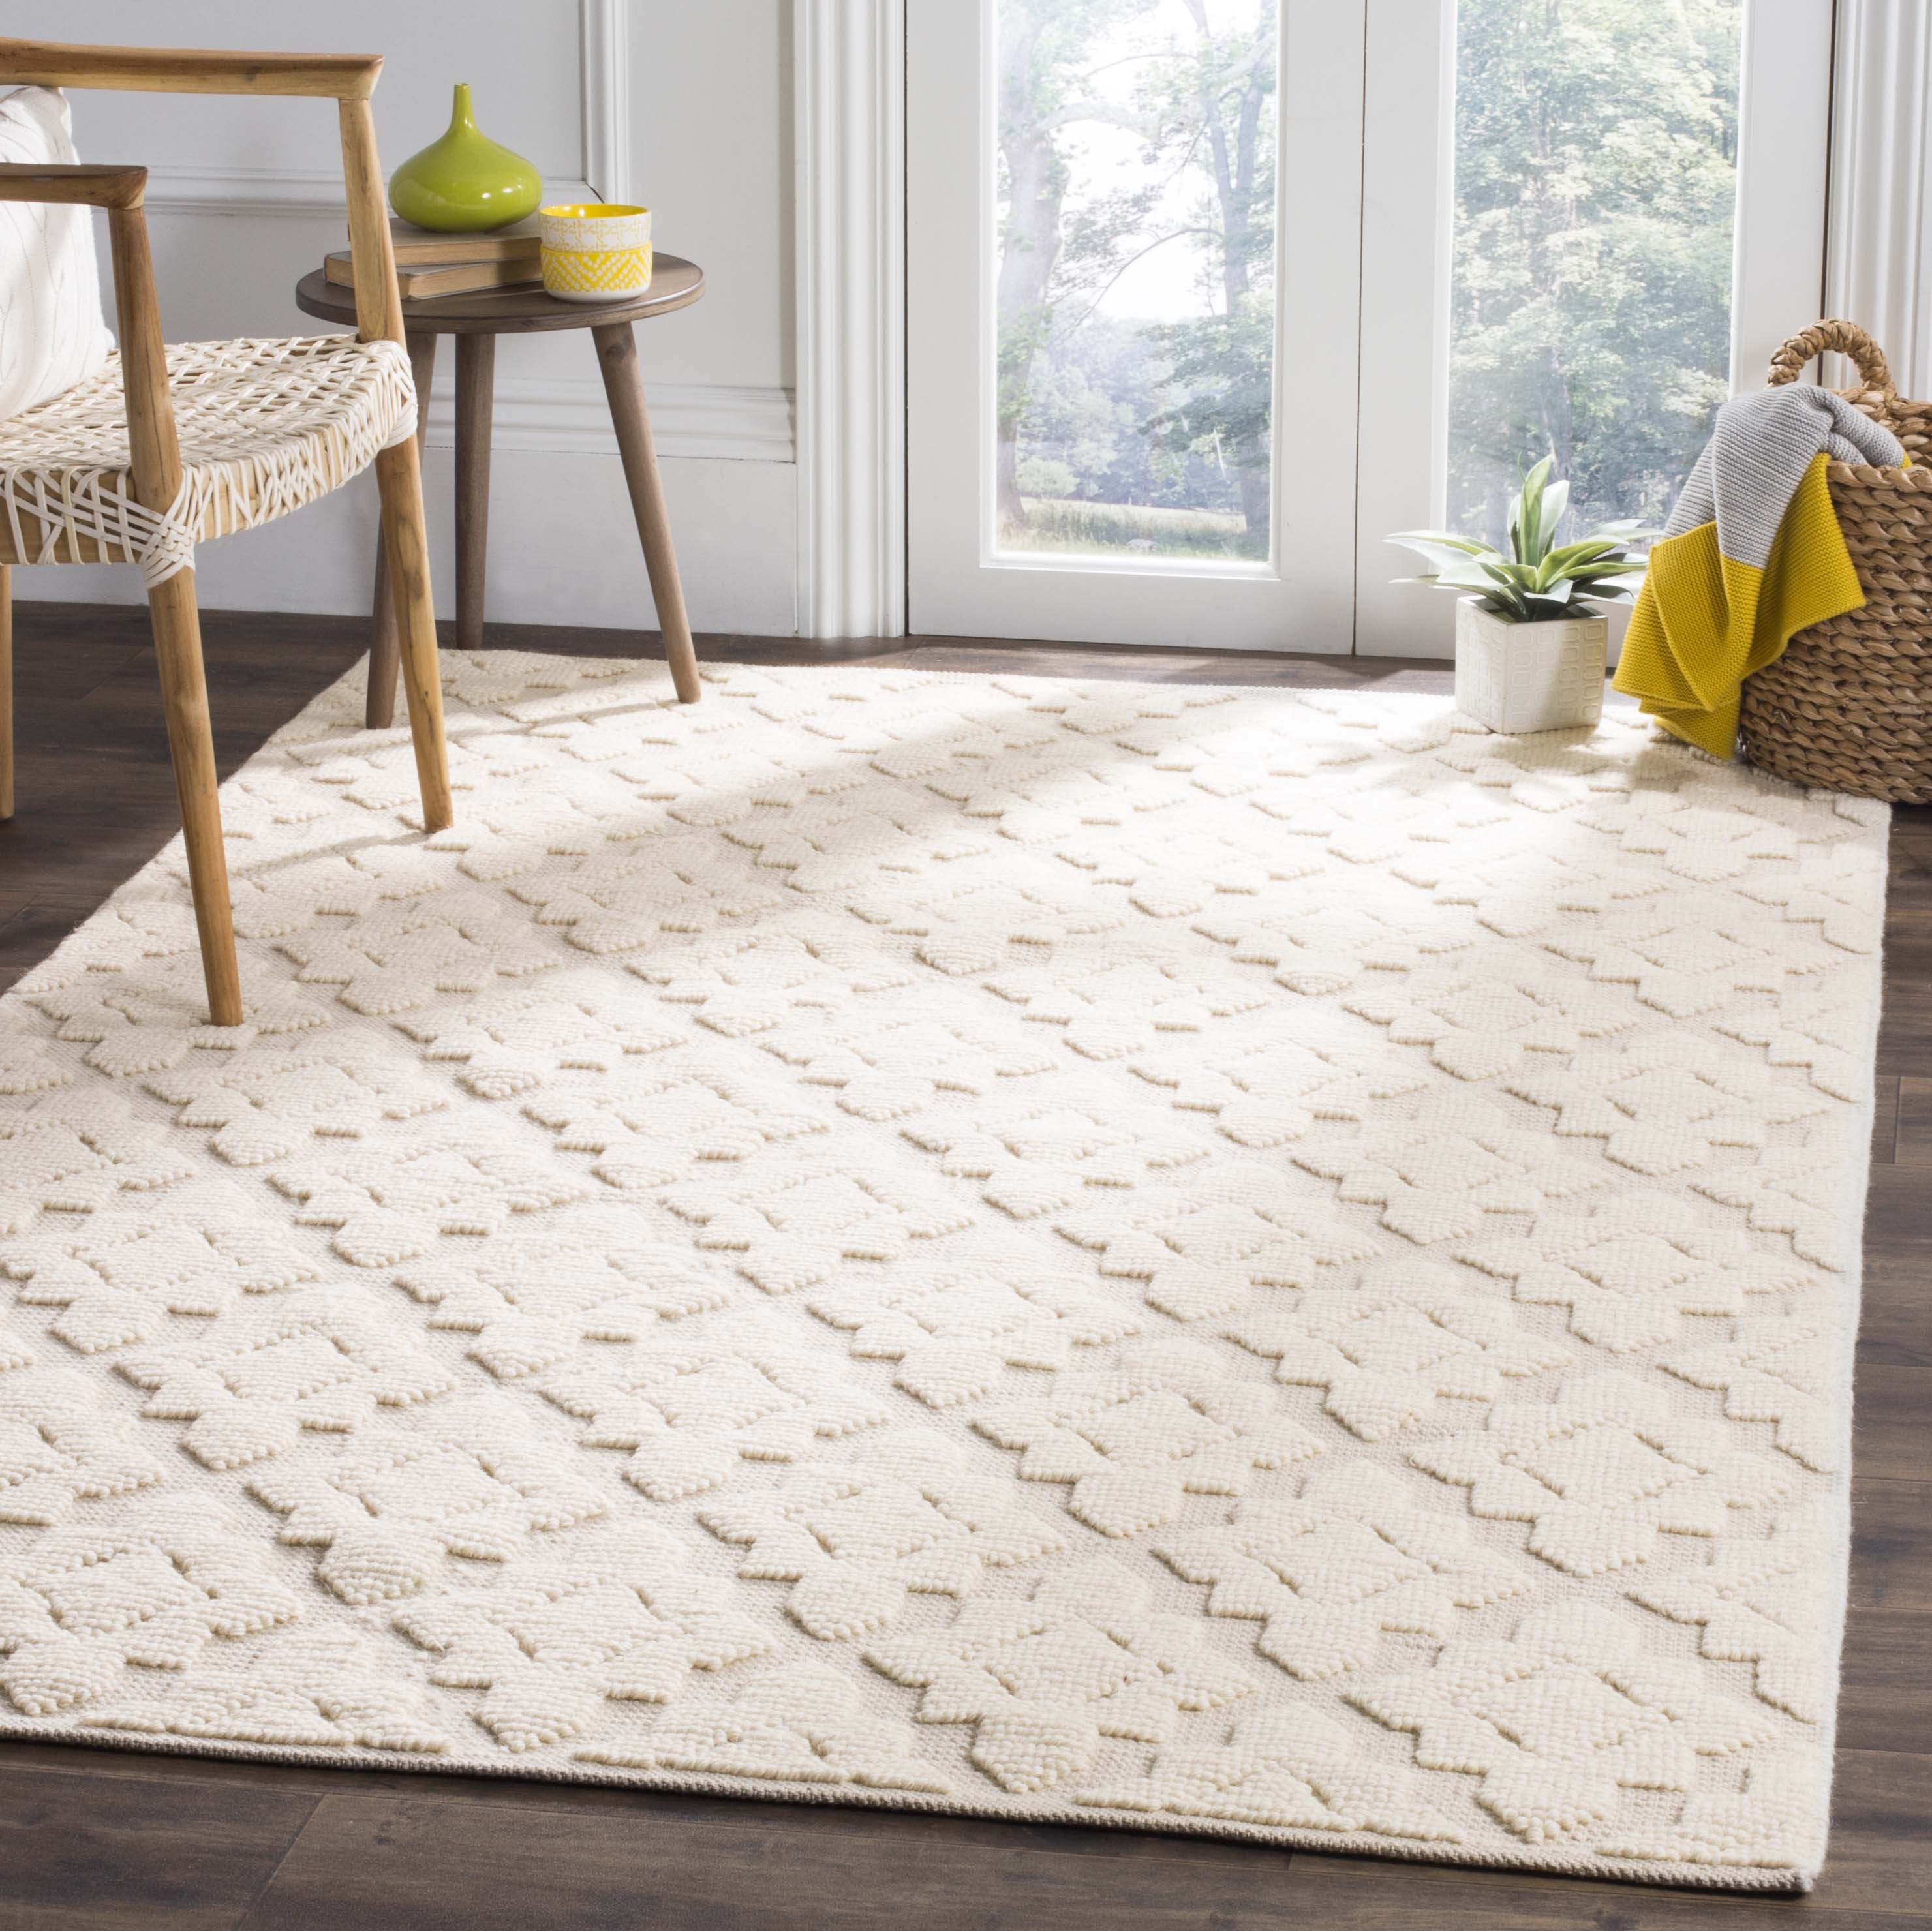 Arlo Home Hand Woven Area Rug, VRM103A, Ivory,  3' X 5' - Image 1